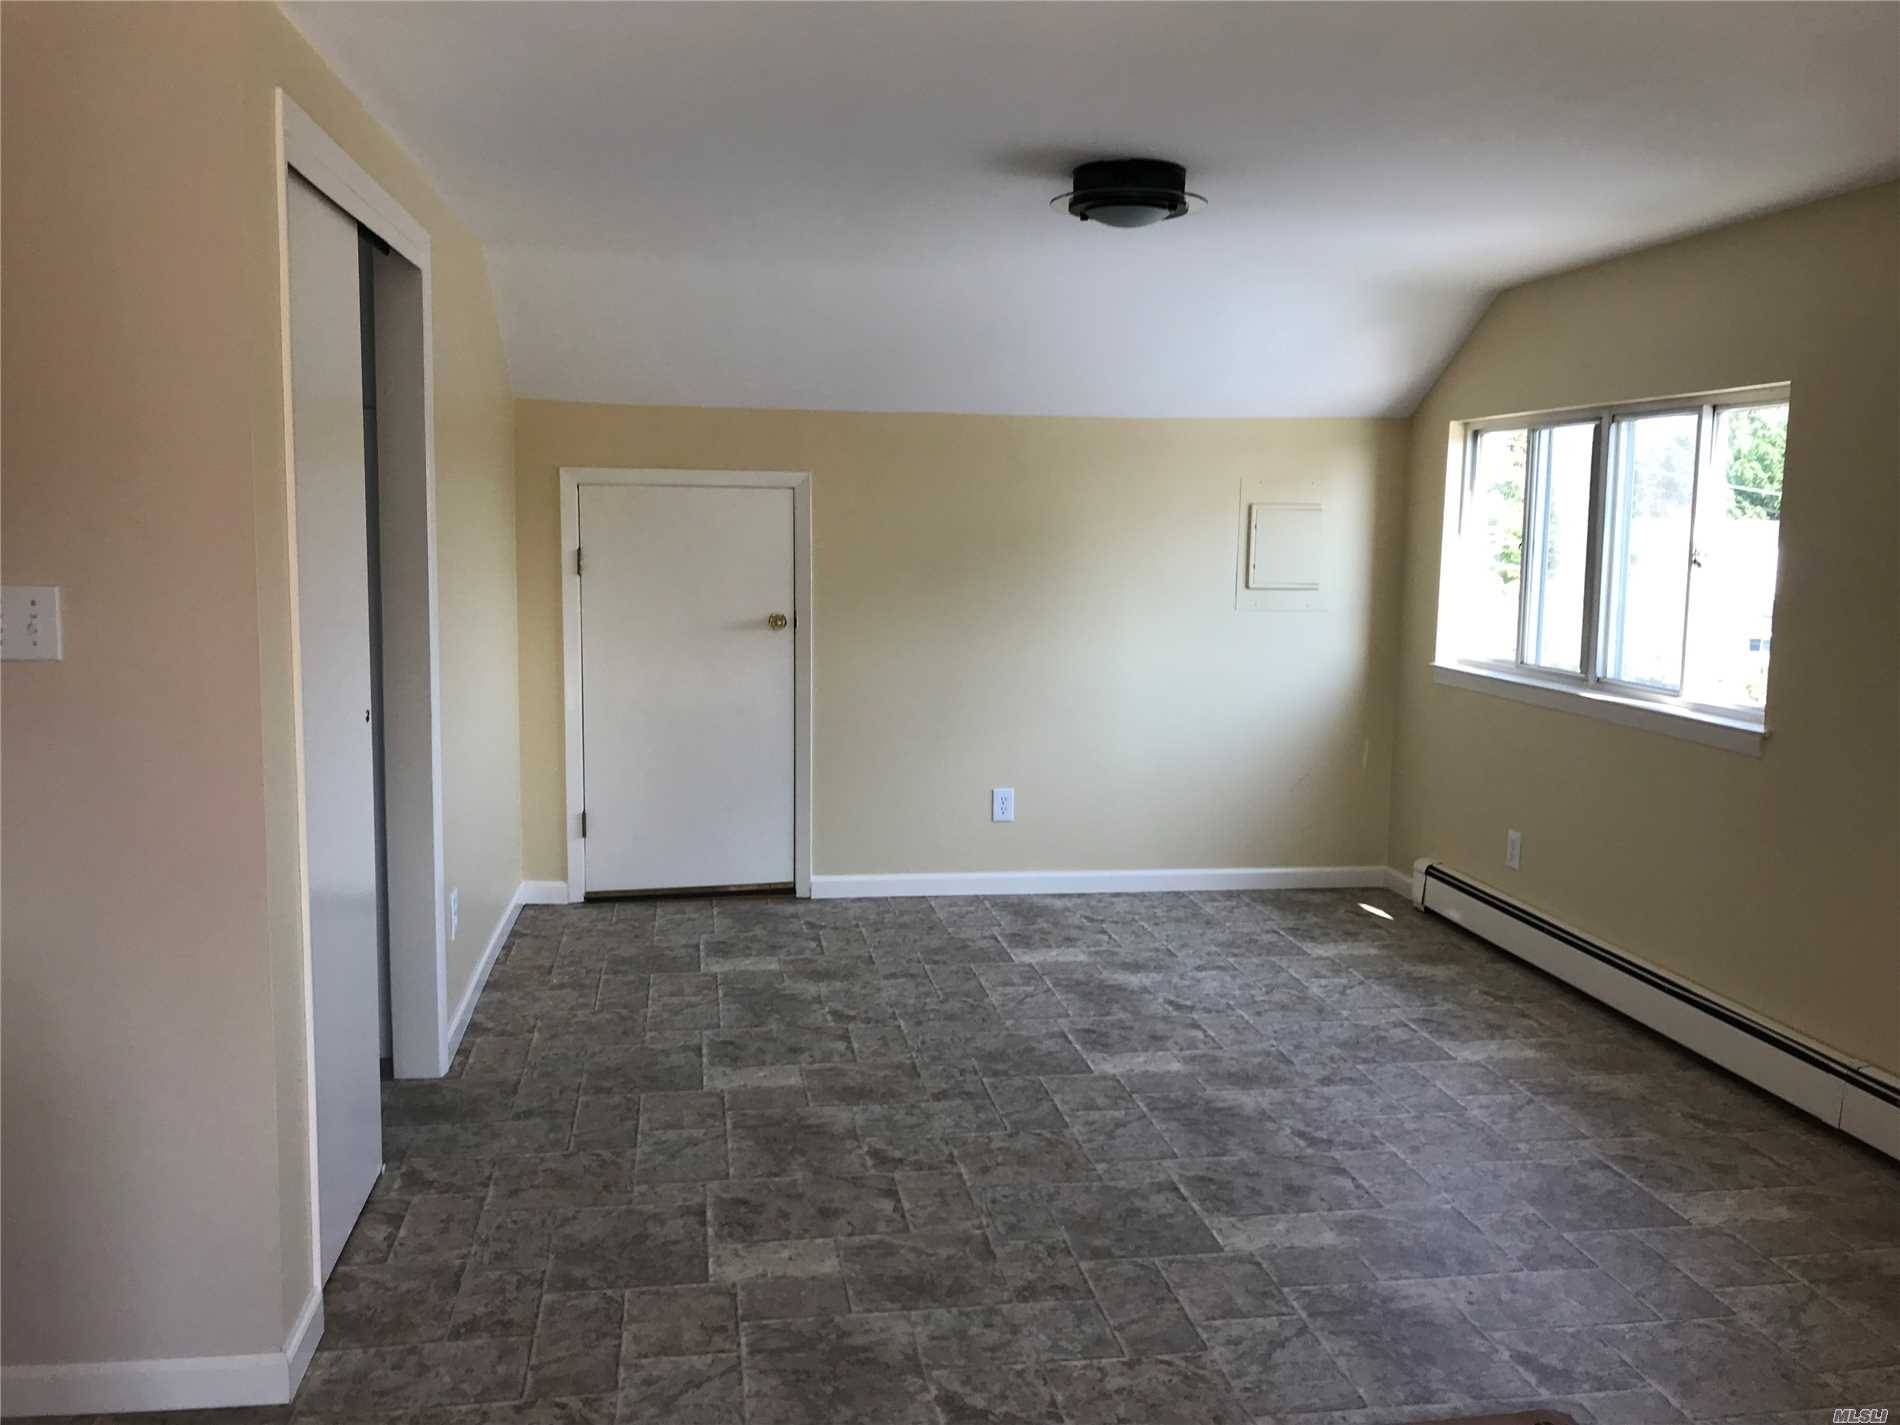 Completely Renovated, All New Appliances, Oversized Eat-In Kitchen W/Dining Area, 2 Large Bedrooms, Full Bath, Lots Of Storage, Separate Entrance.